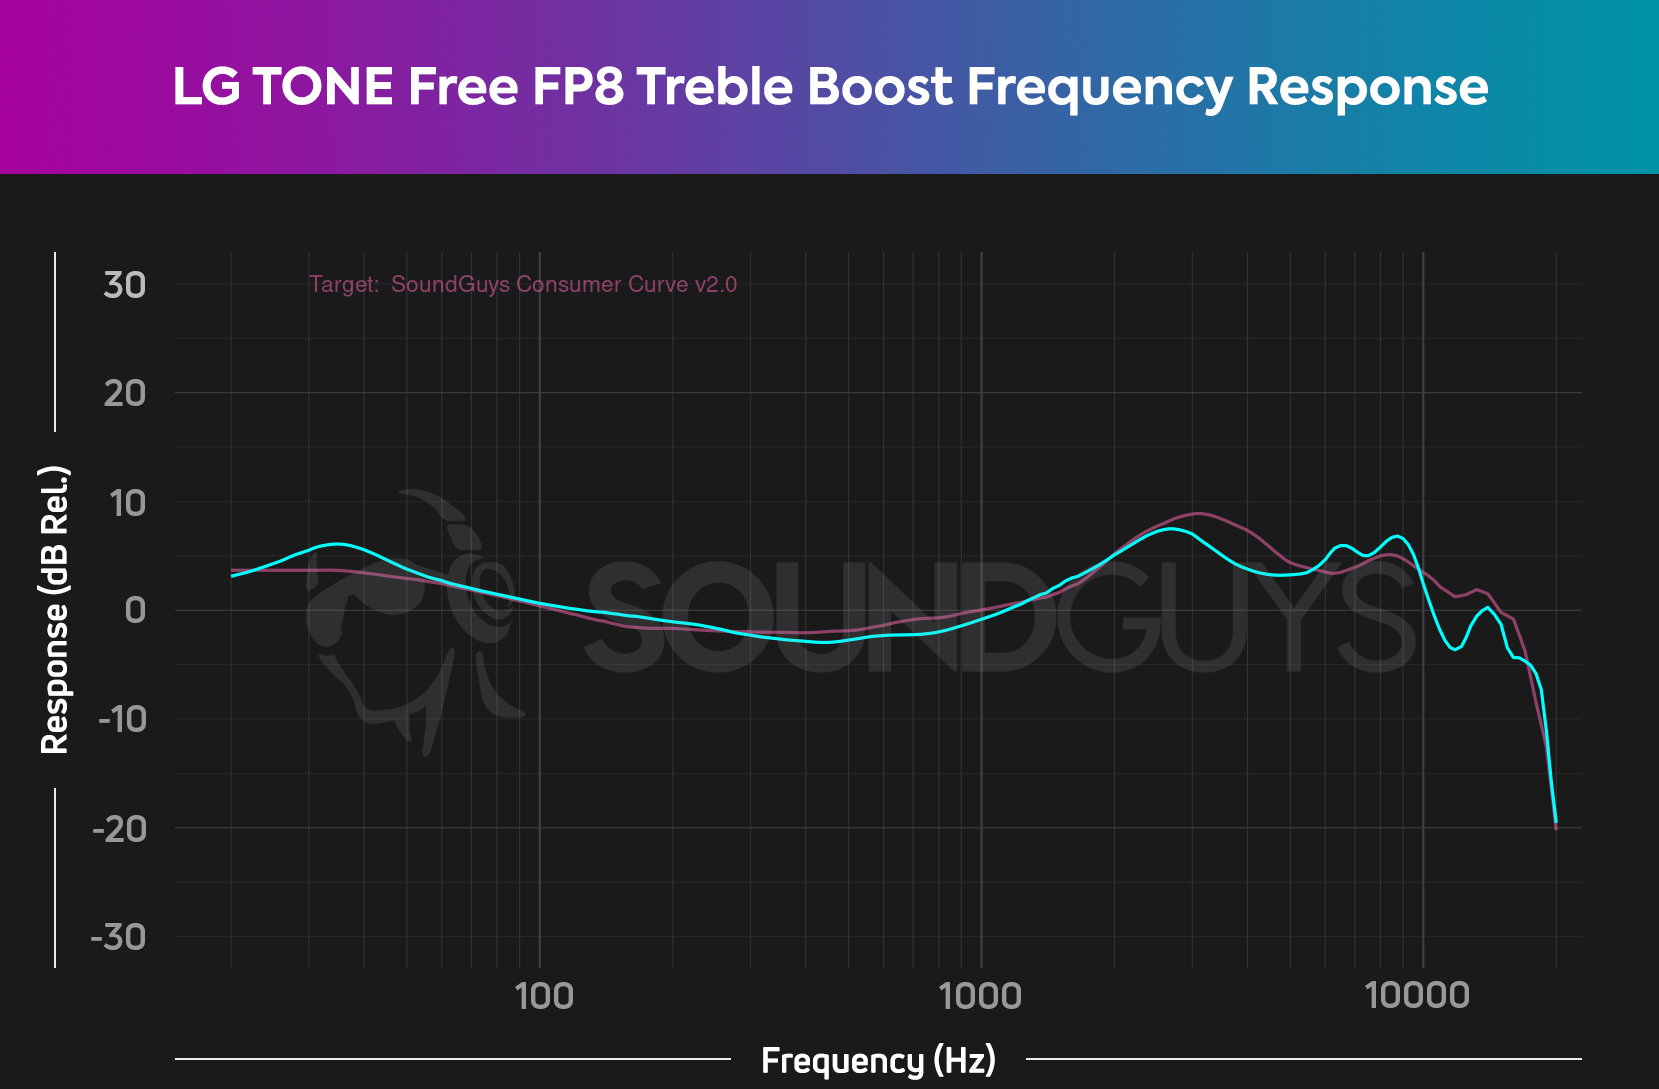 The frequency response of the Treble Boost preset most closely mirrors our house curve on the LG TONE Free FP8.